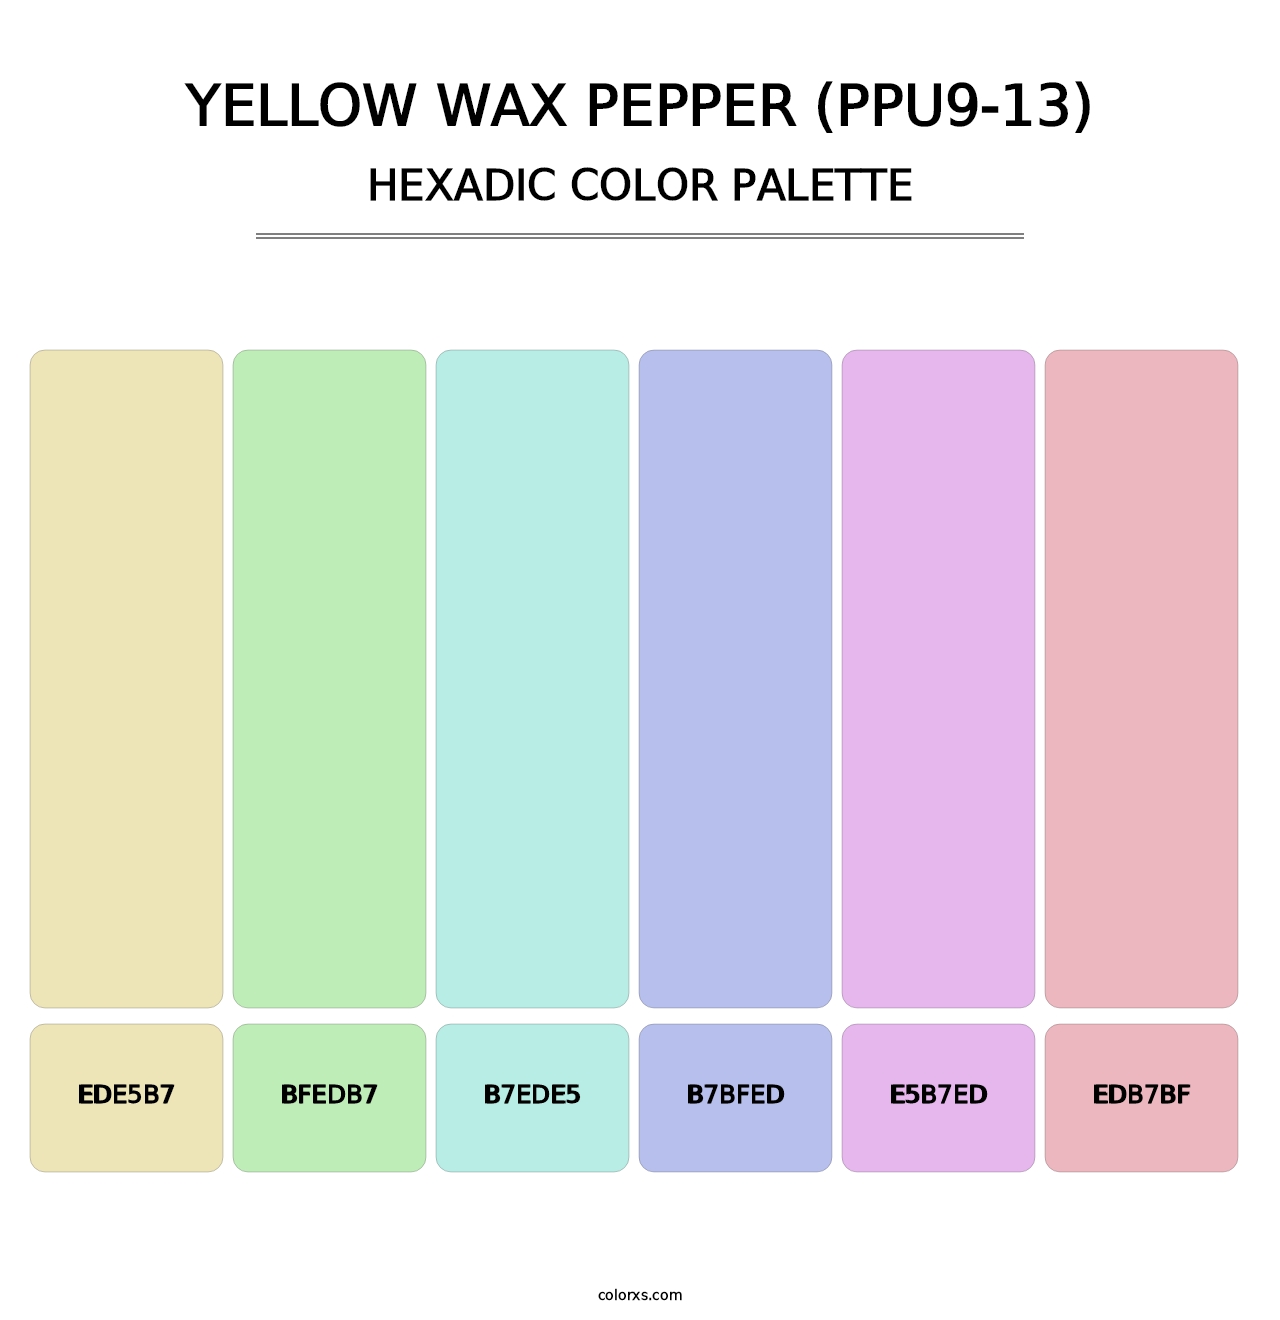 Yellow Wax Pepper (PPU9-13) - Hexadic Color Palette